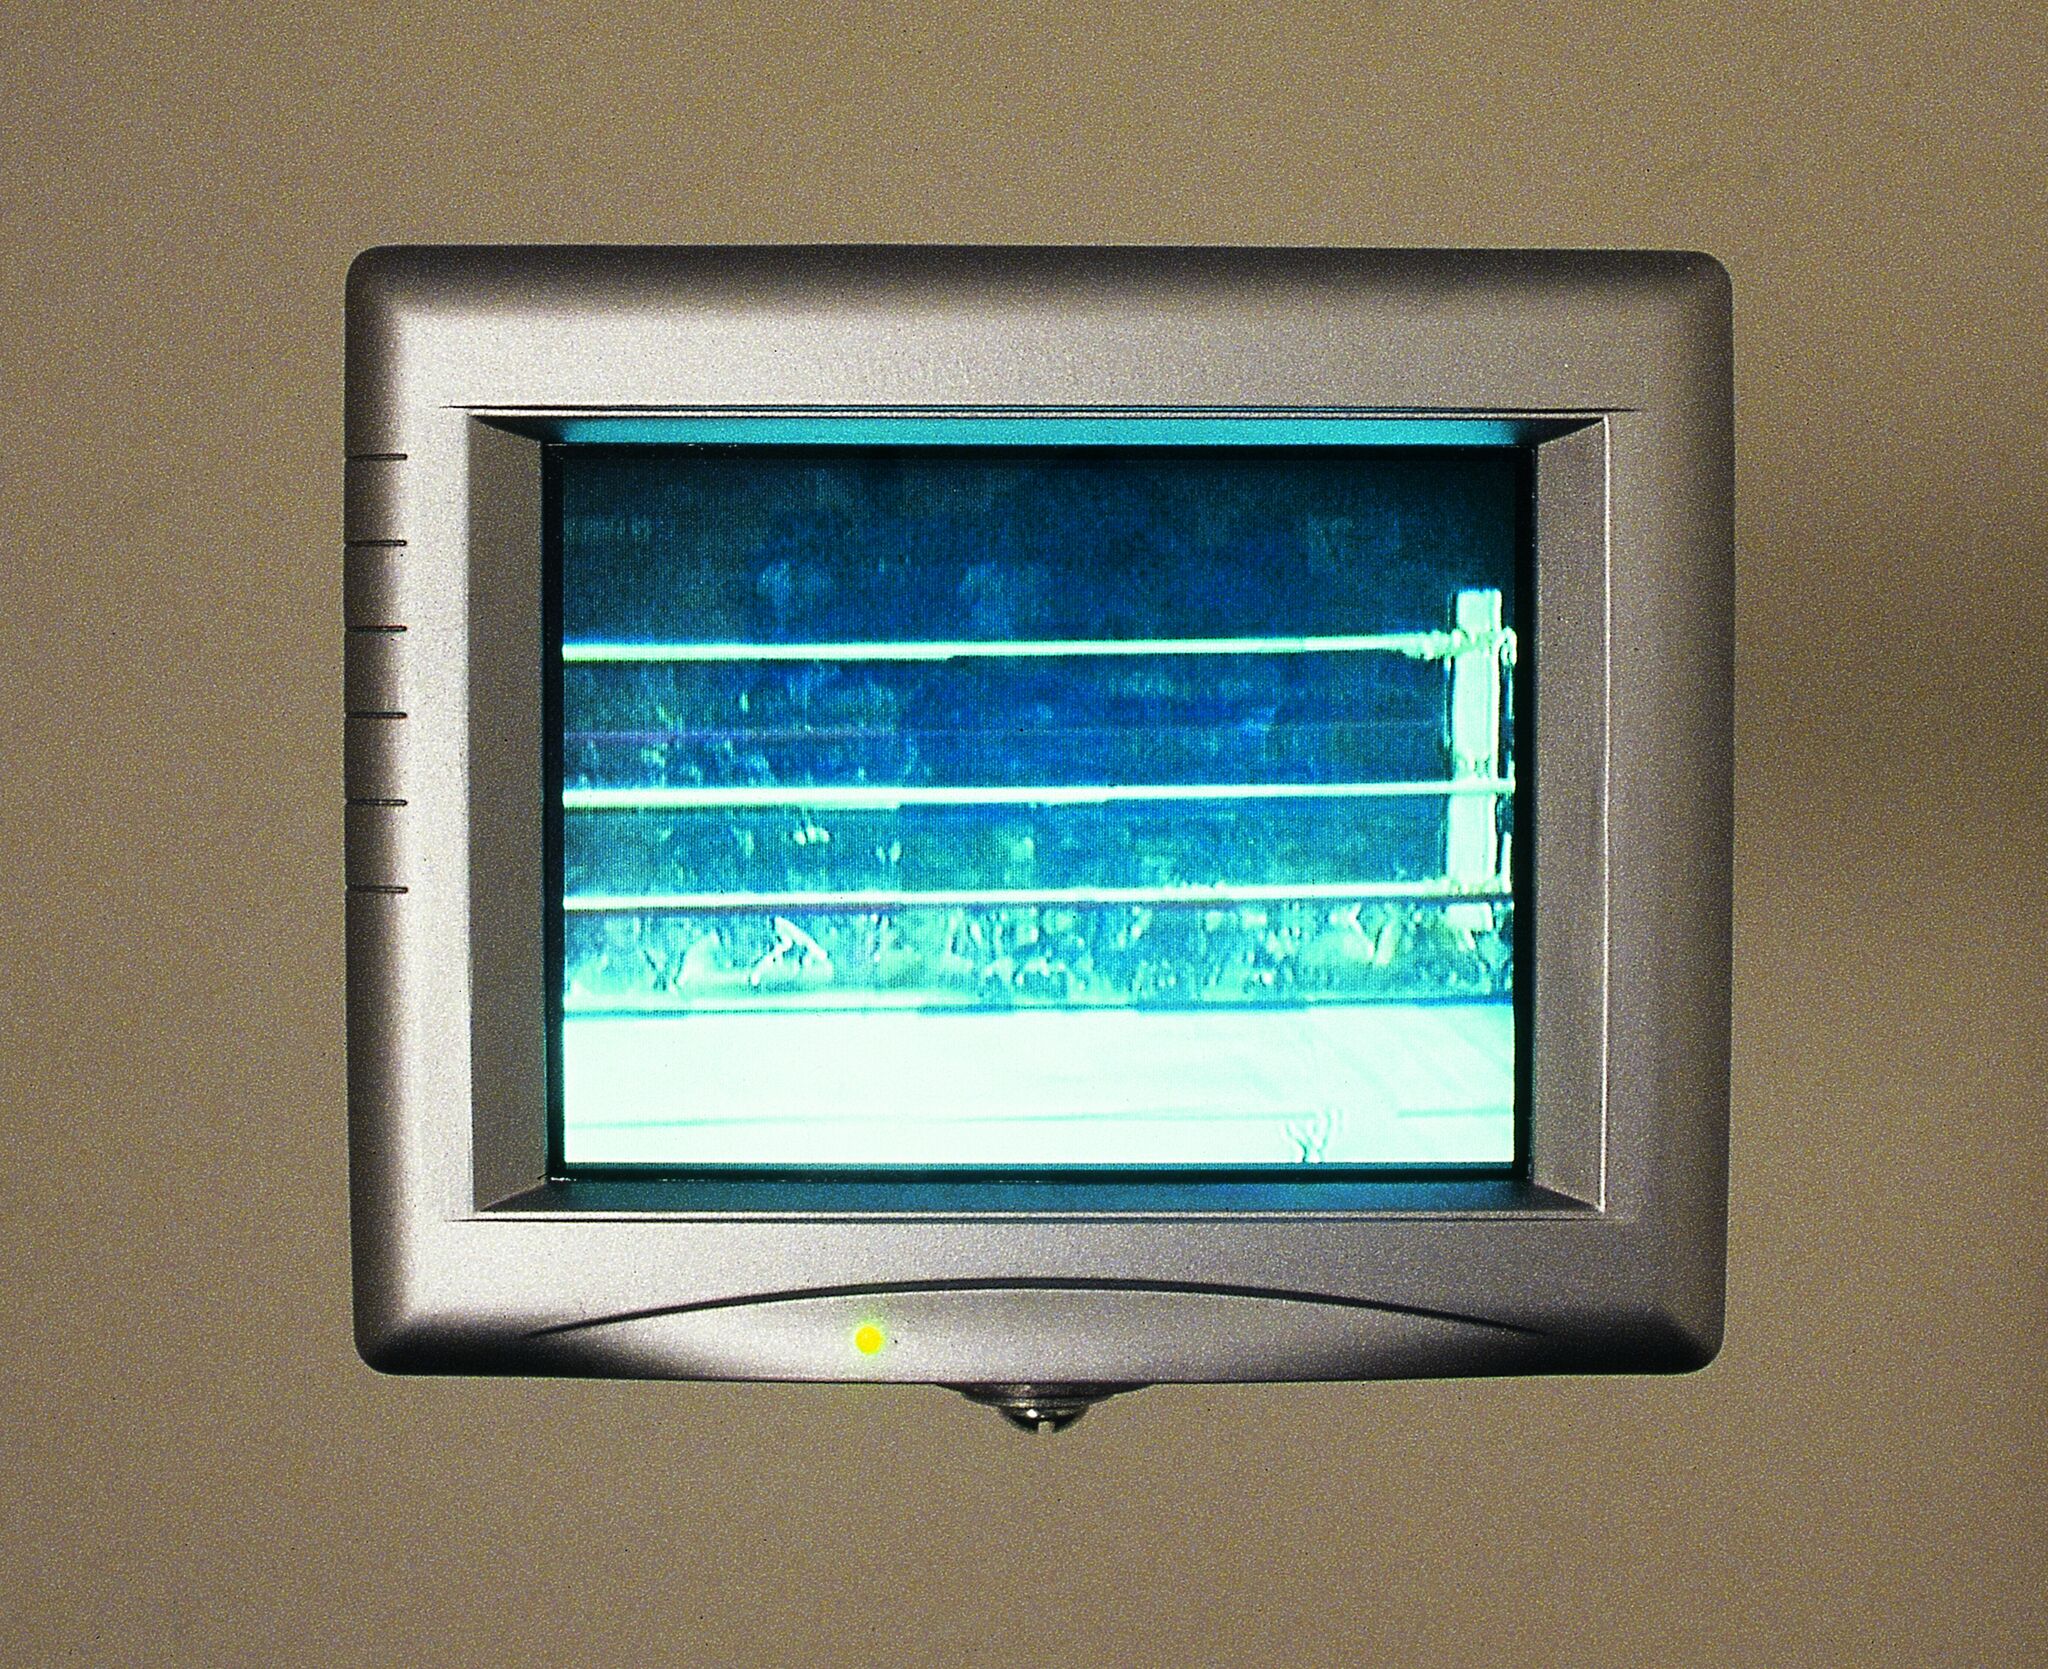 A monitor displaying a view of a wrestling ring.